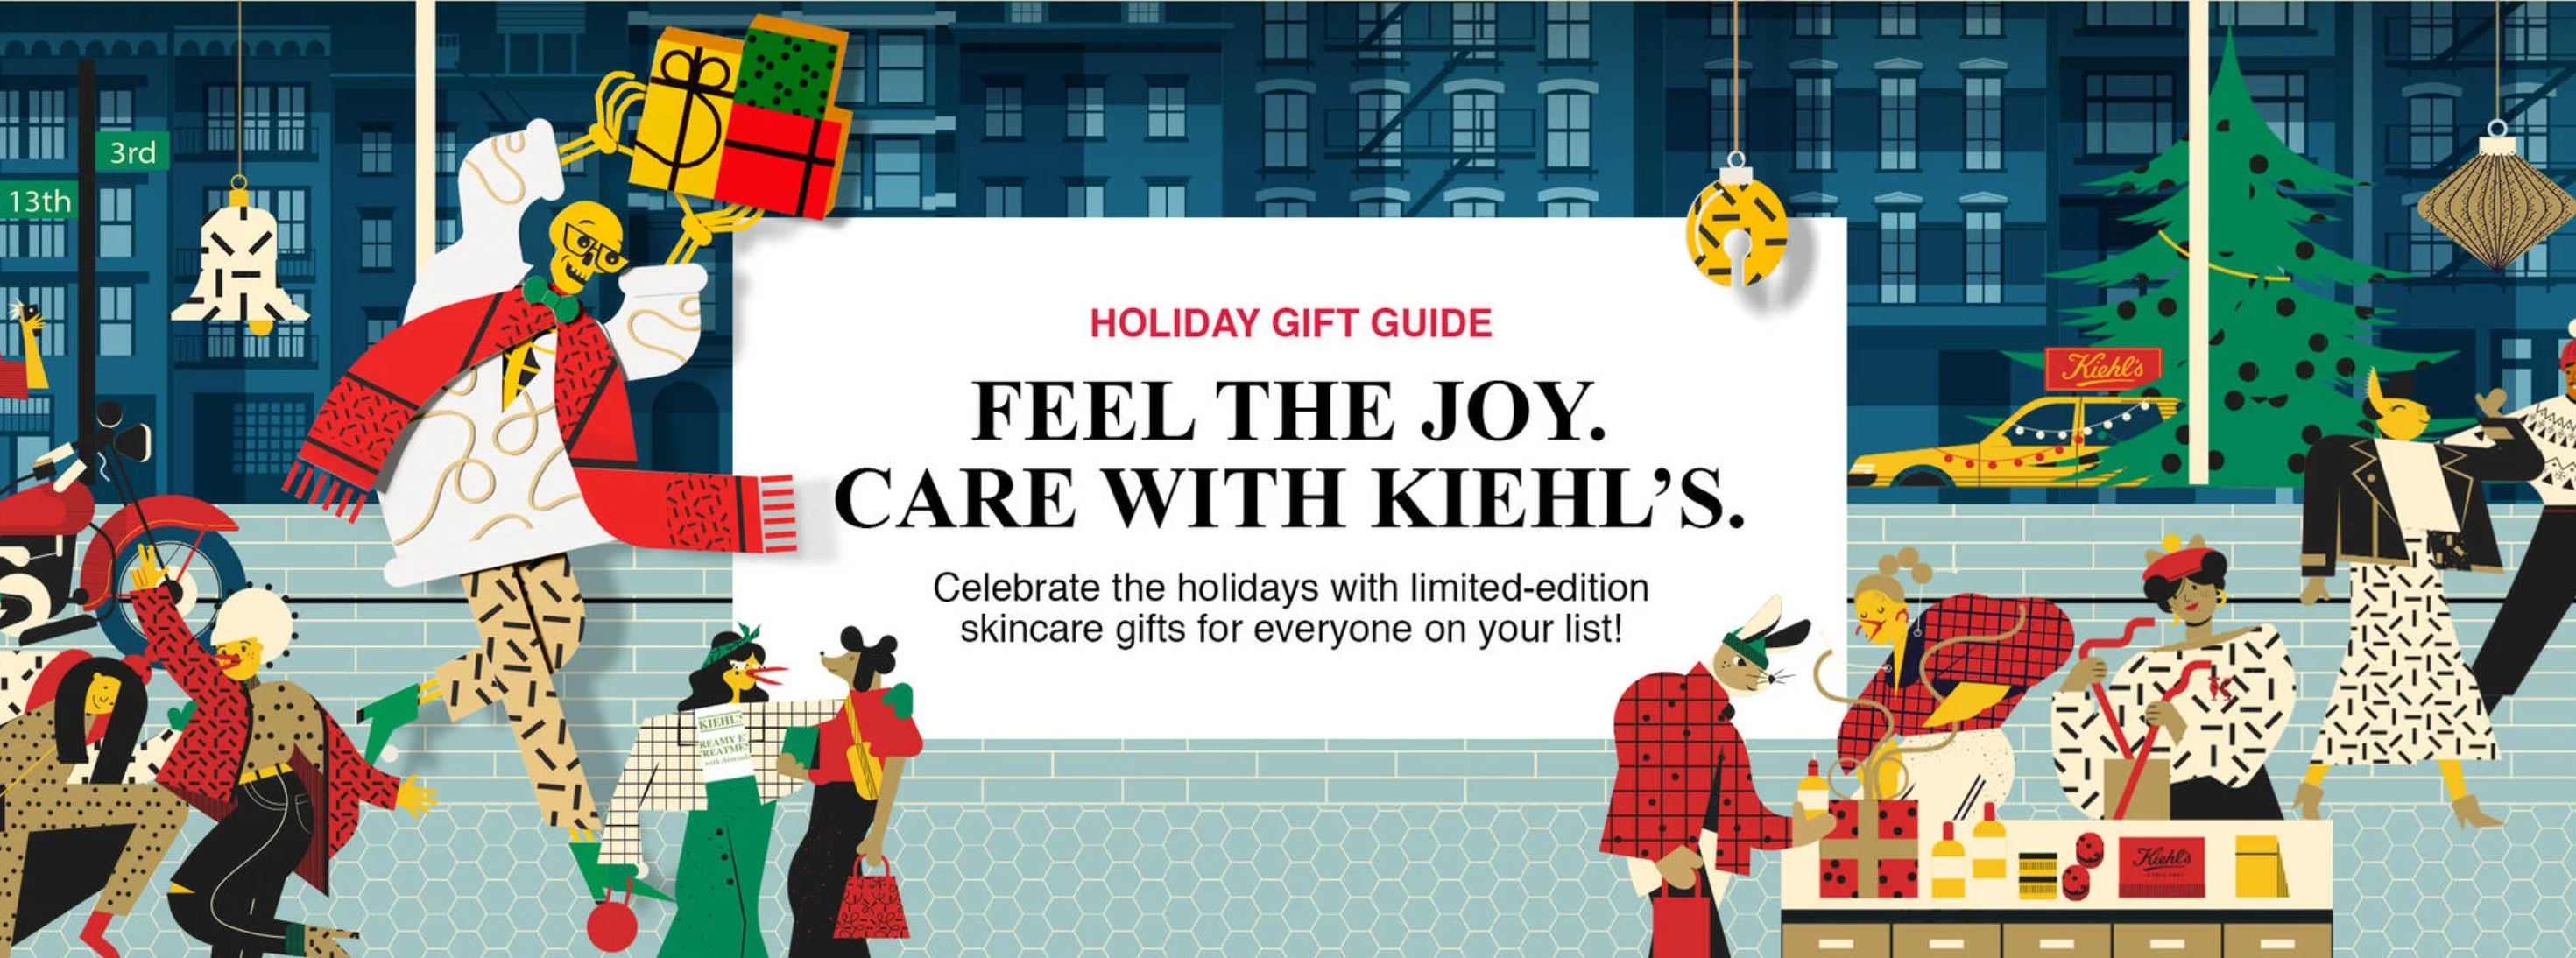 kiehls-holiday-limit-is-as-low-as-47-off-35-for-a-four-piece-set-of-masks-2020-11-5